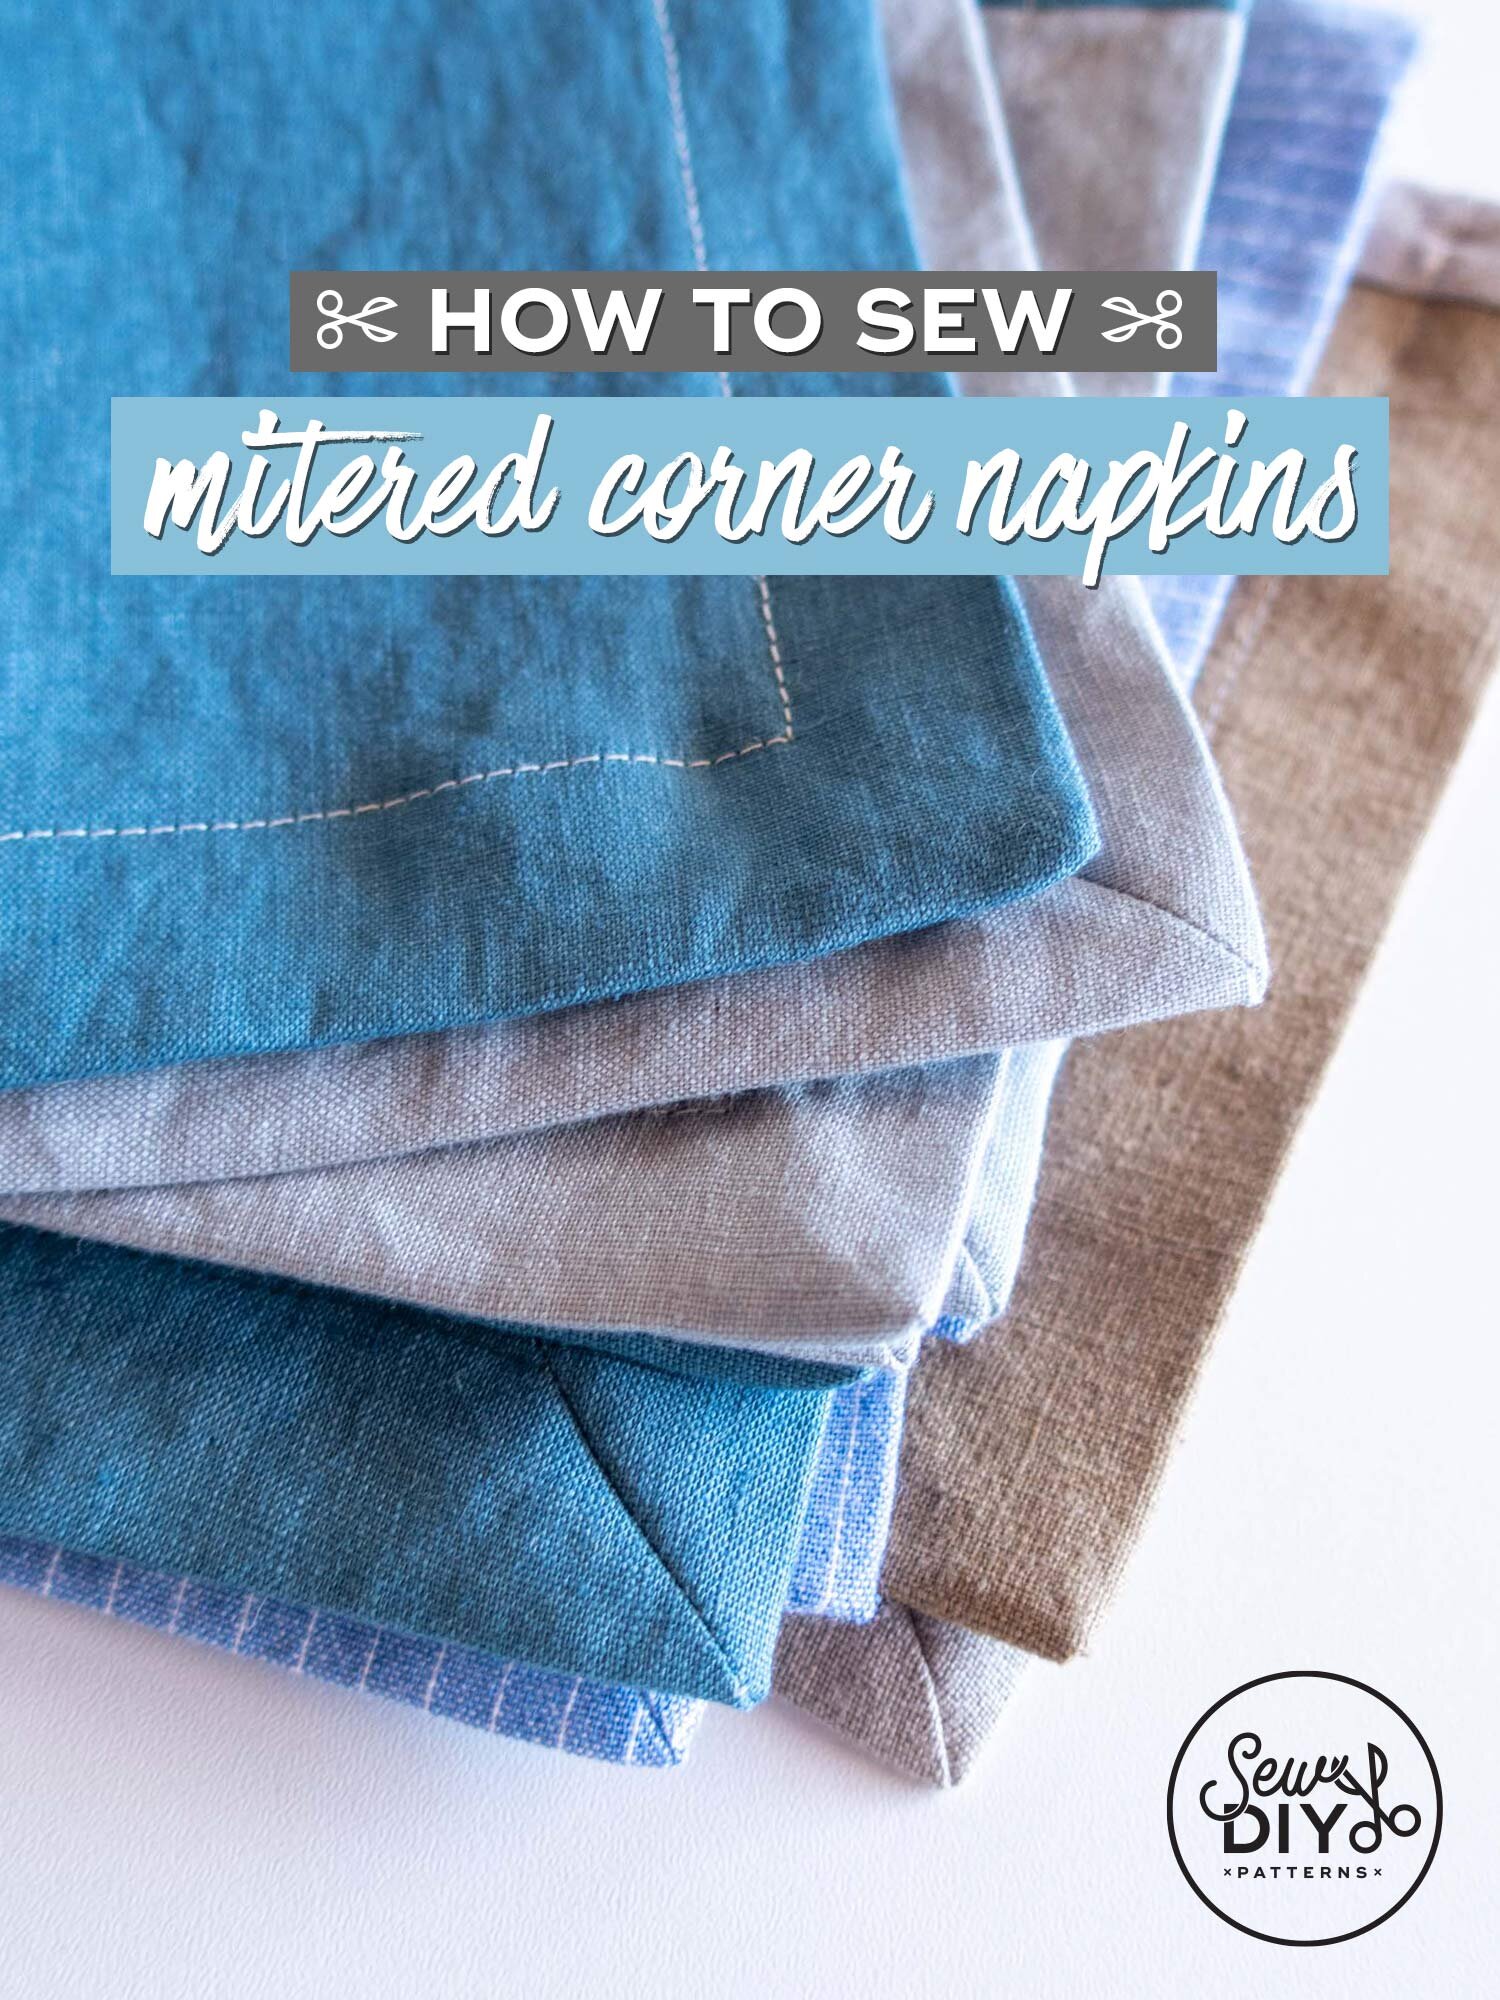 The Best Fabric to Use to Make Cloth Napkins